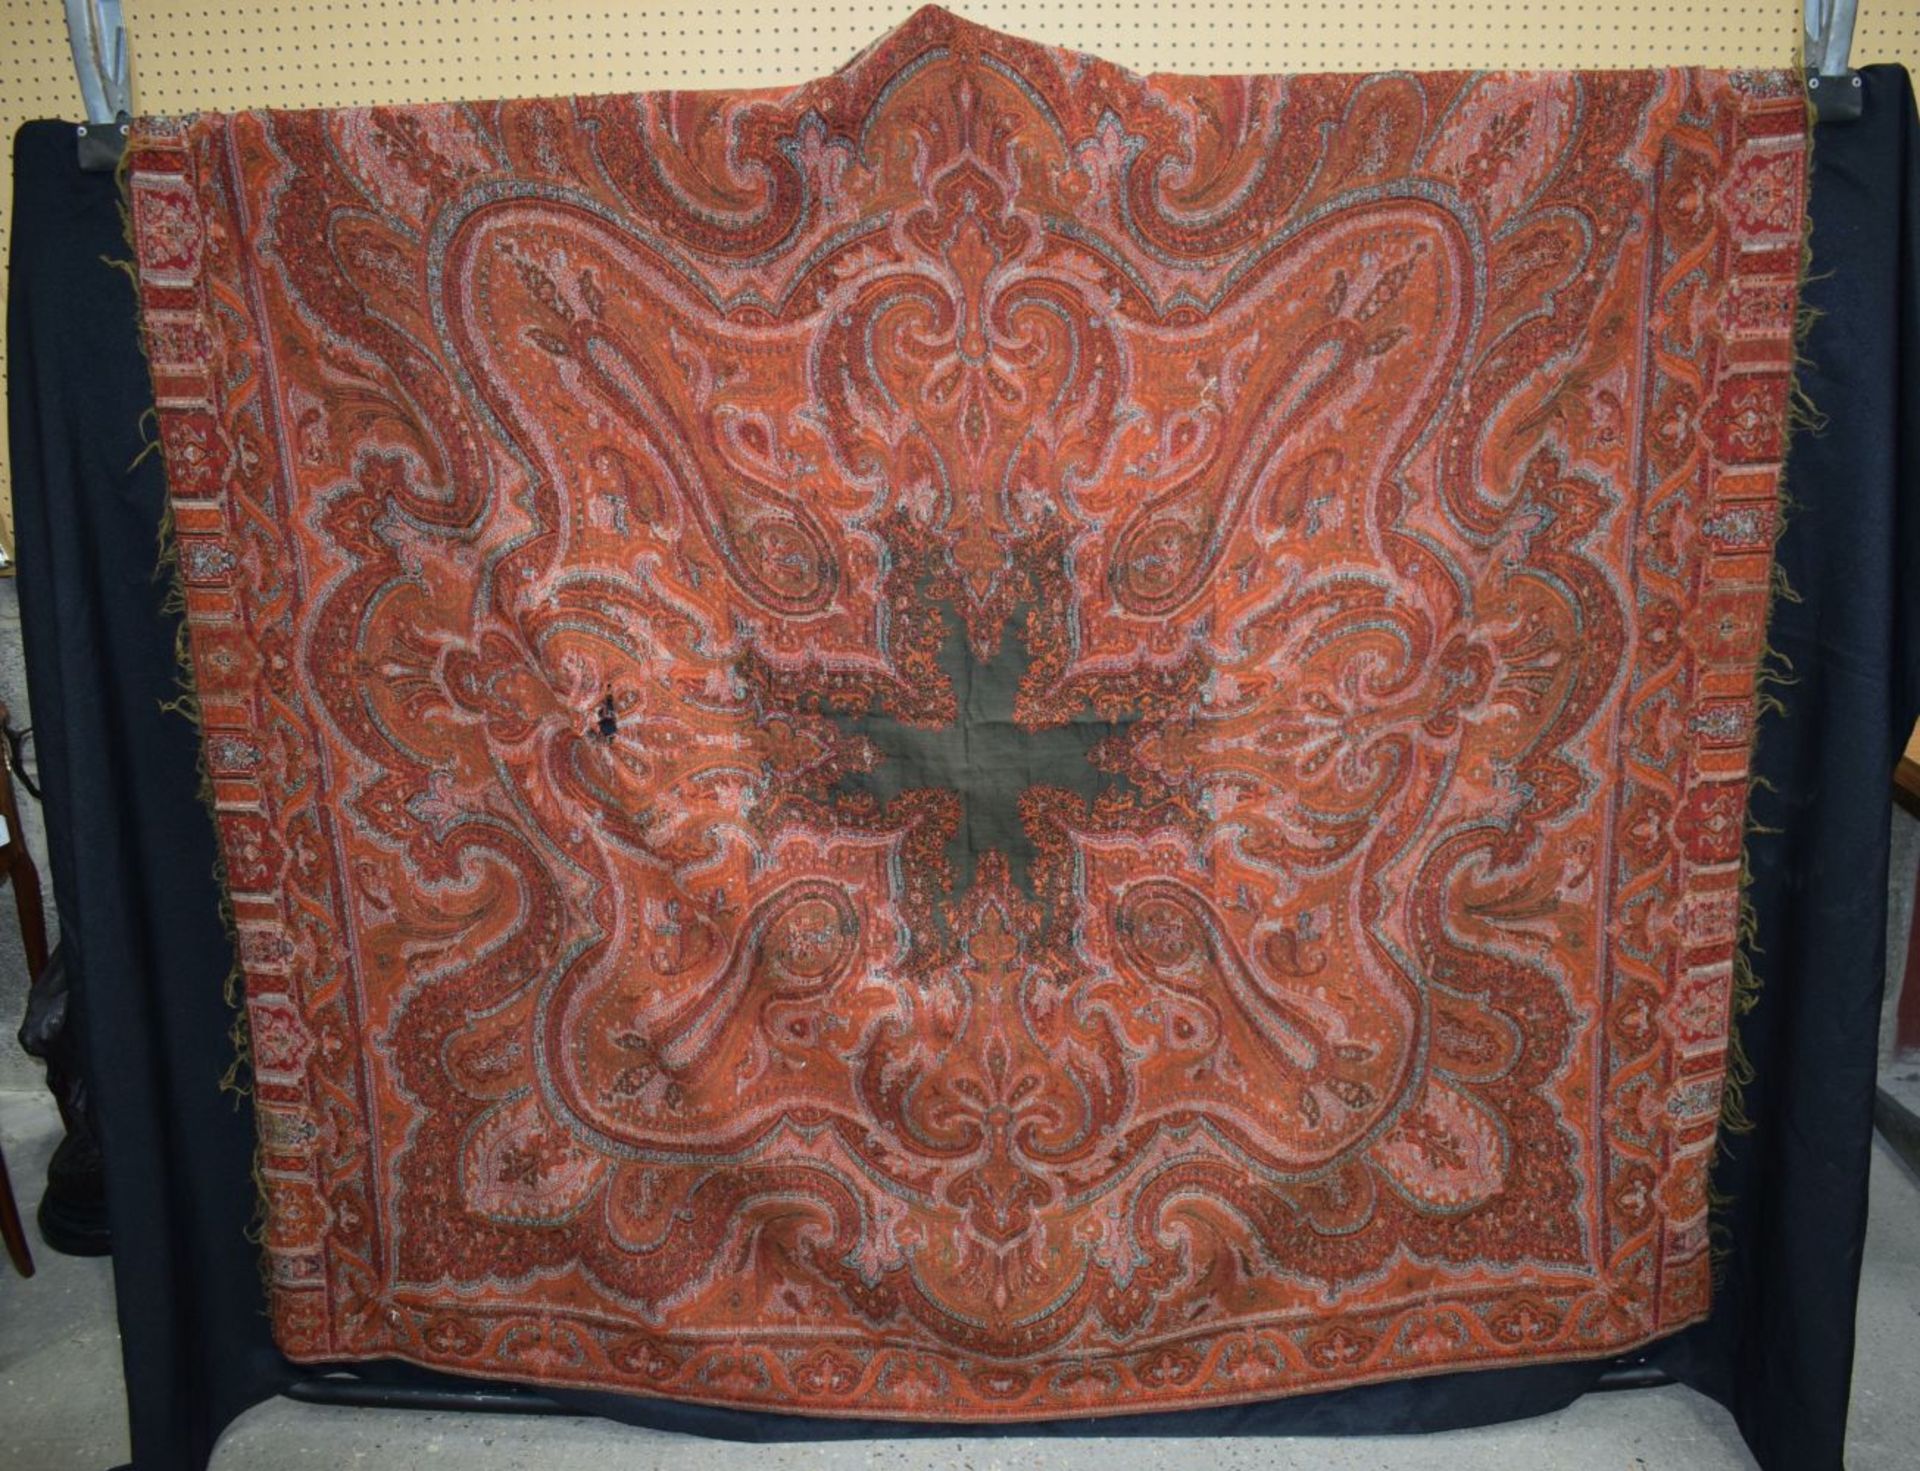 An antique Indian embroidered textile 140 x 140 cm - Image 9 of 10